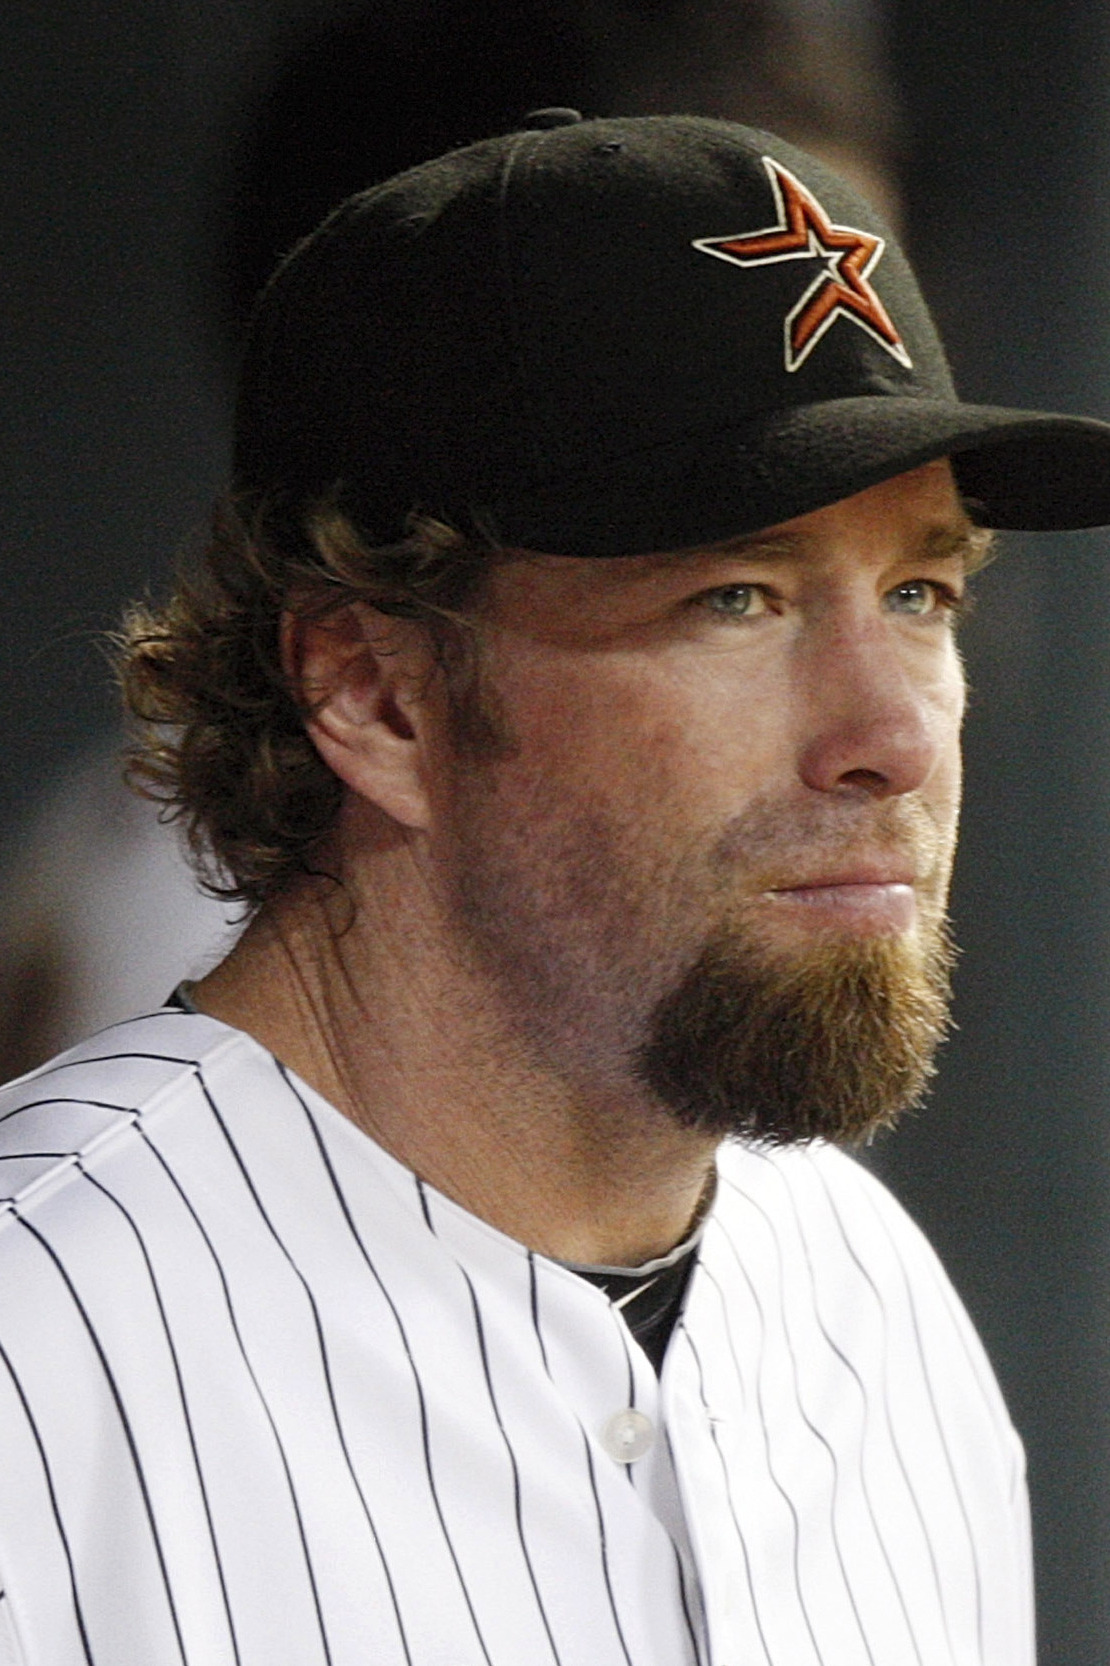 When Houston Astros legend Jeff Bagwell refuted PED accusations around the  time of his induction into the Hall of Fame